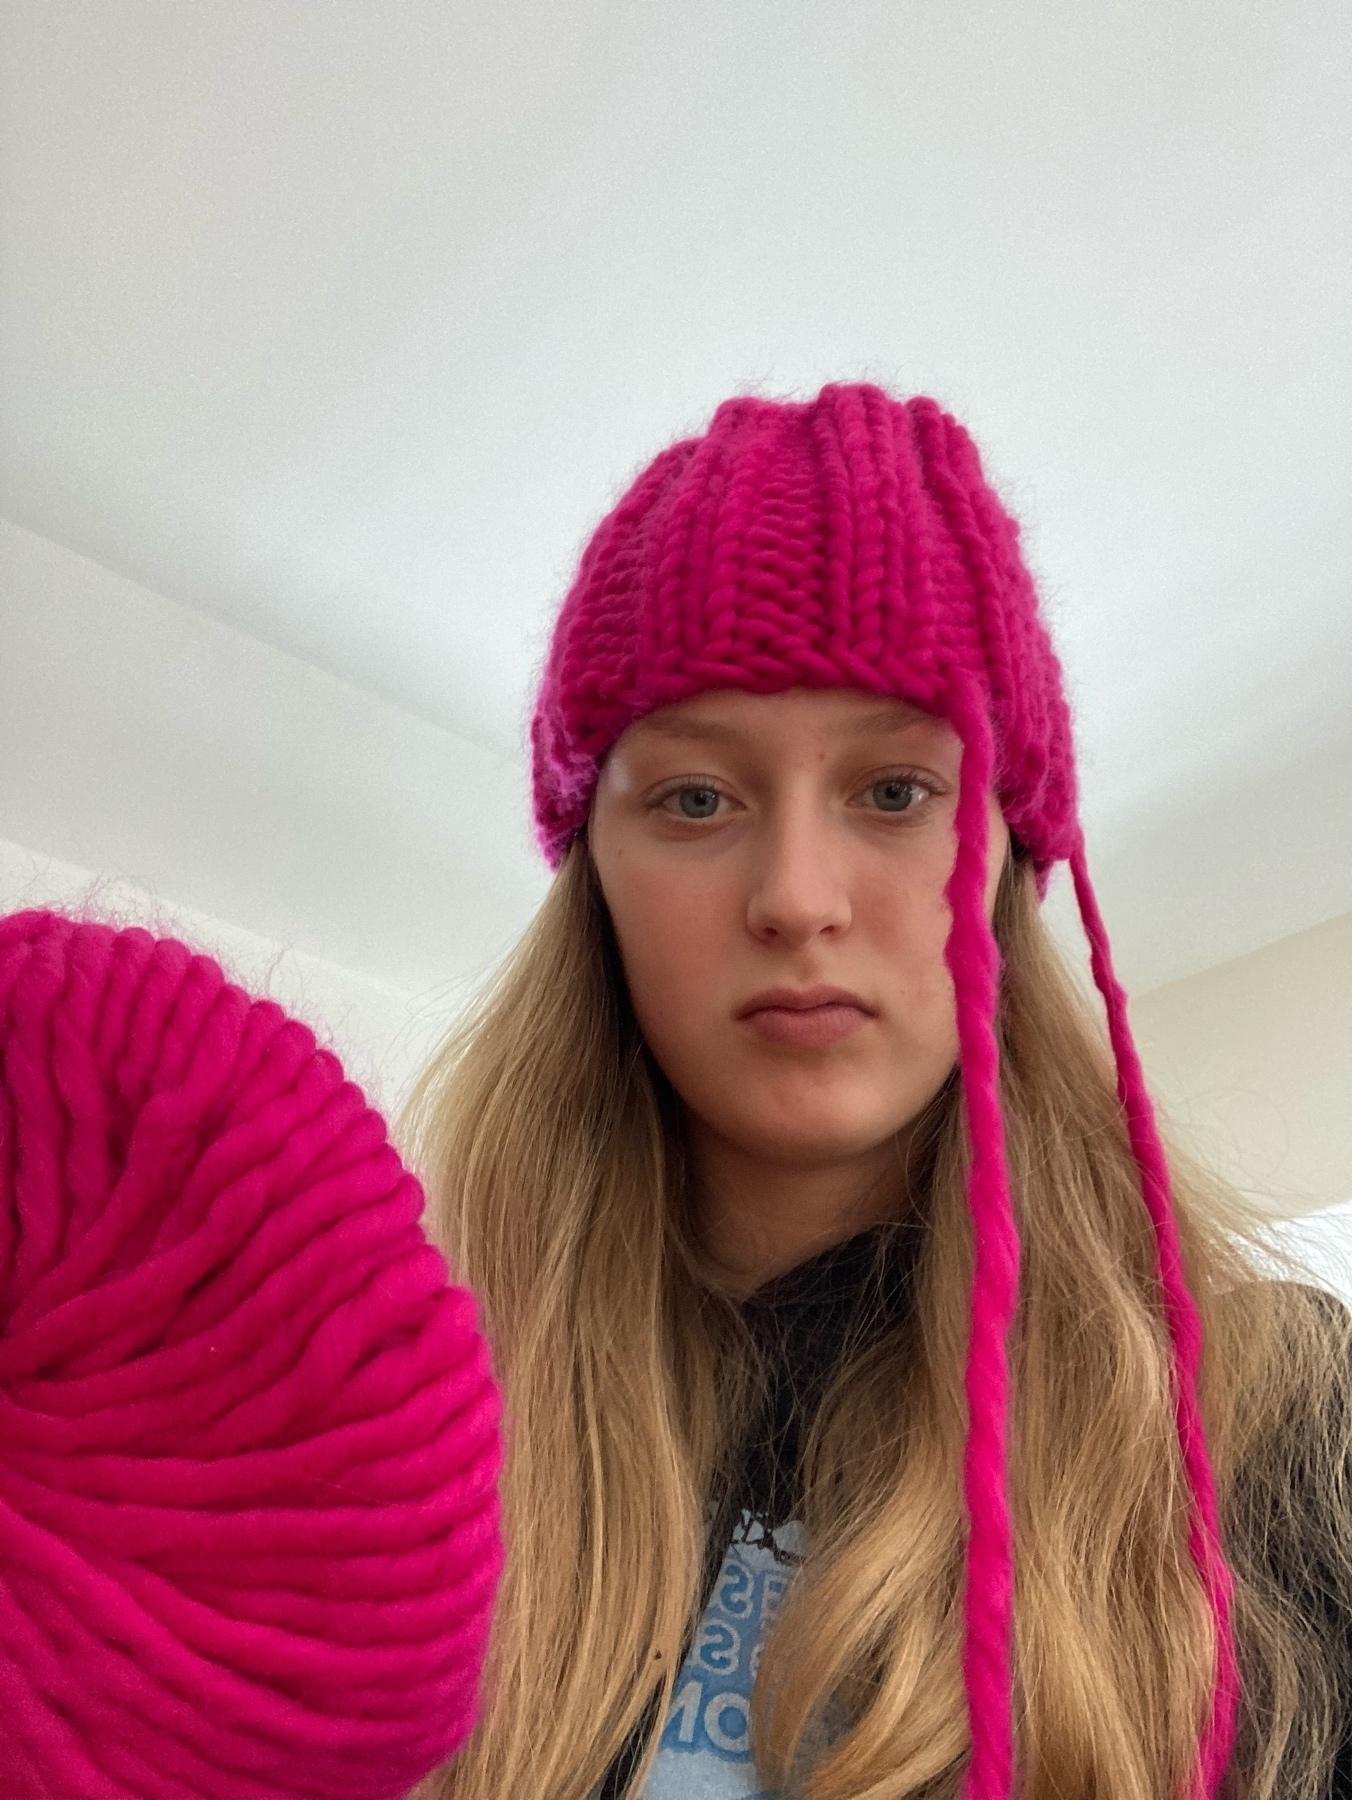 Partially knit pink hat on head with ball of yarn in foreground left corner